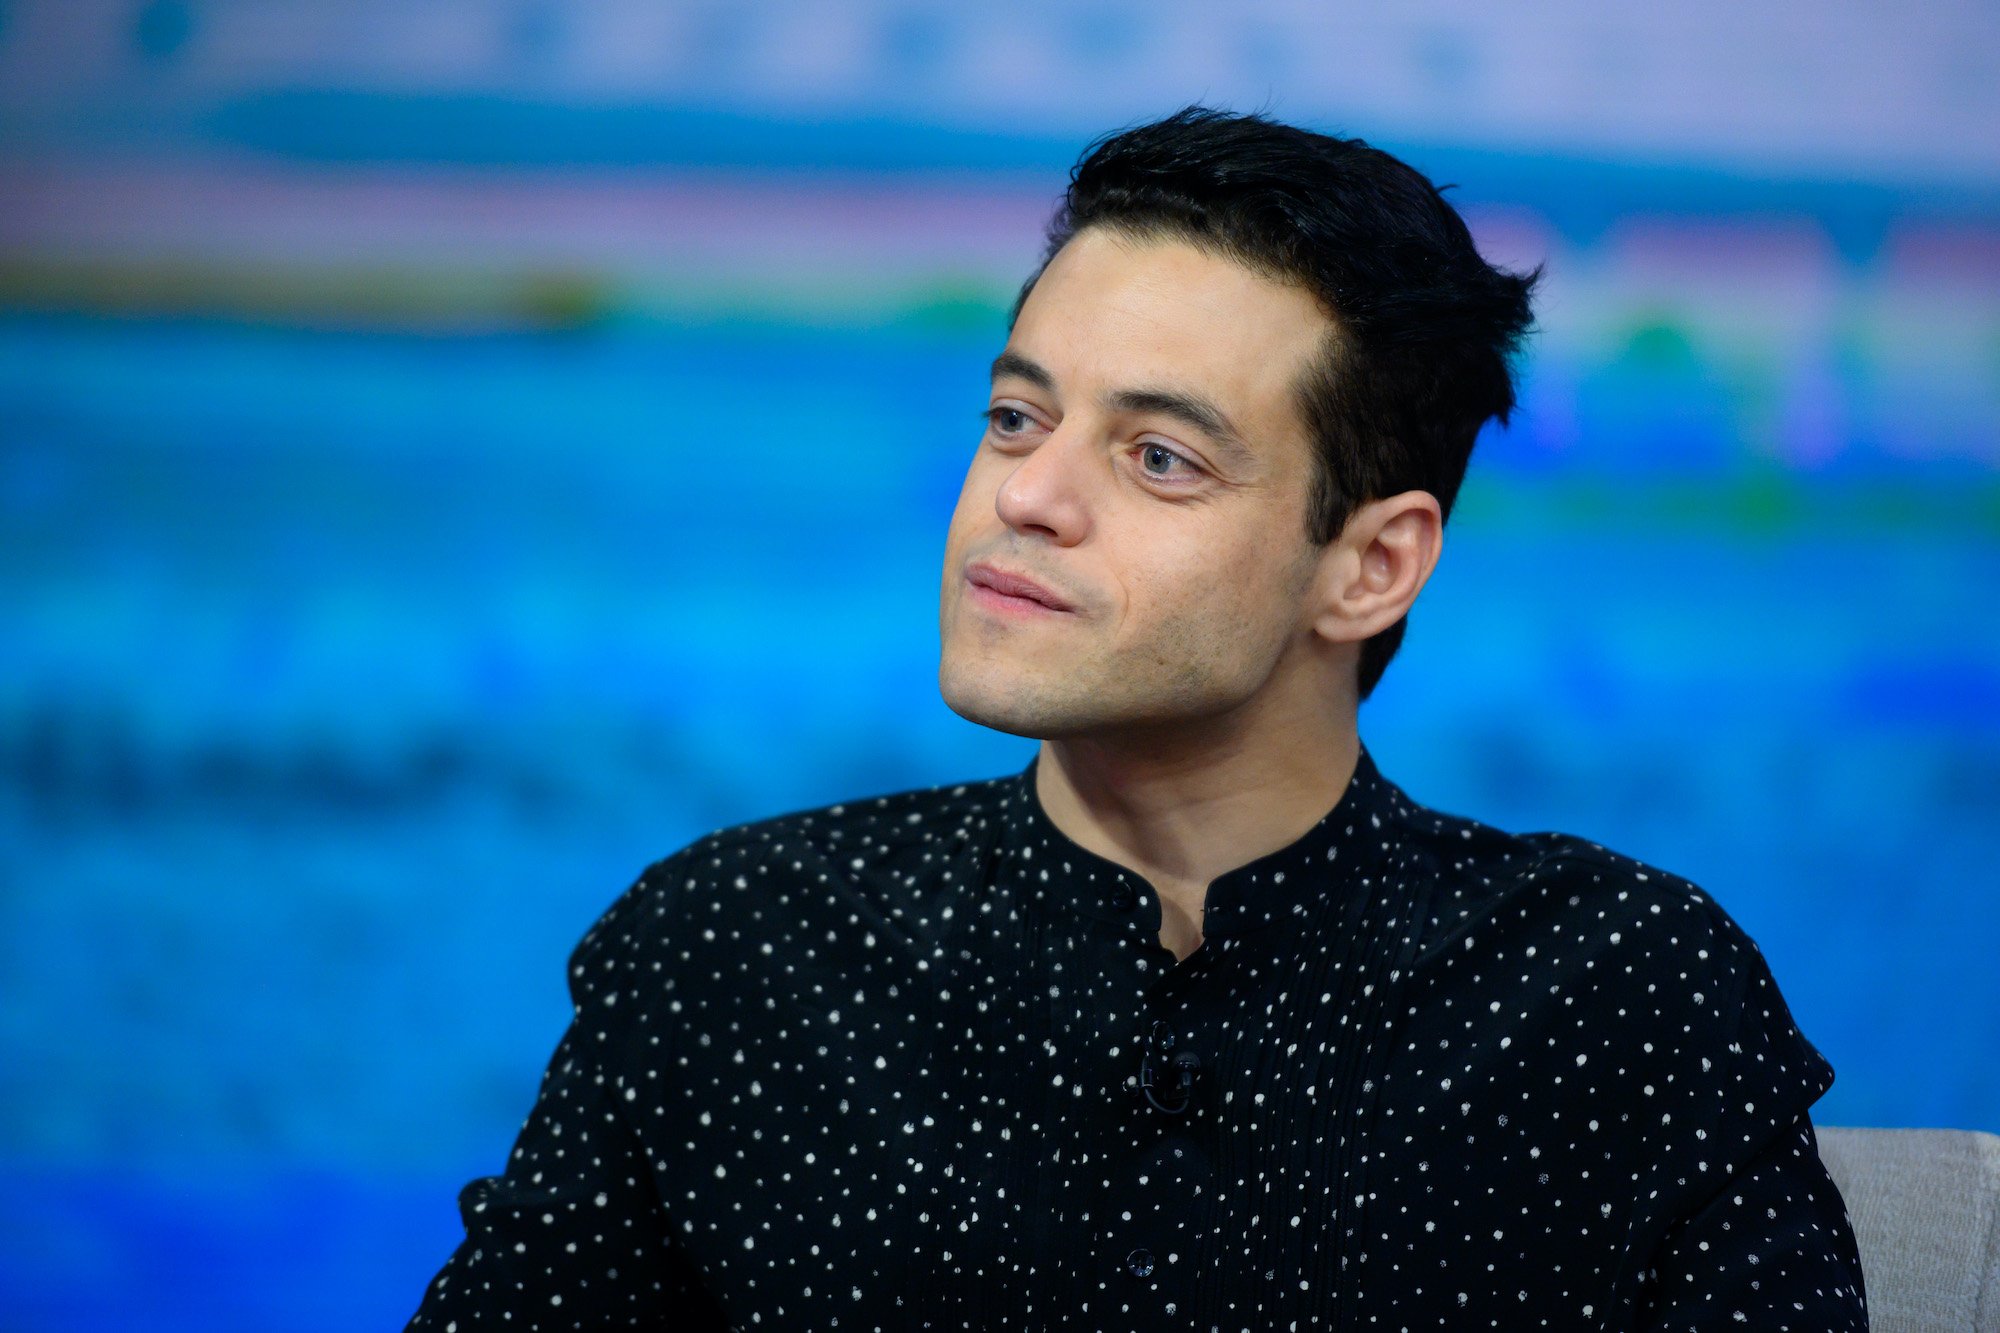 rami-malek-pretended-to-be-his-twin-brother-for-a-grade-and-never